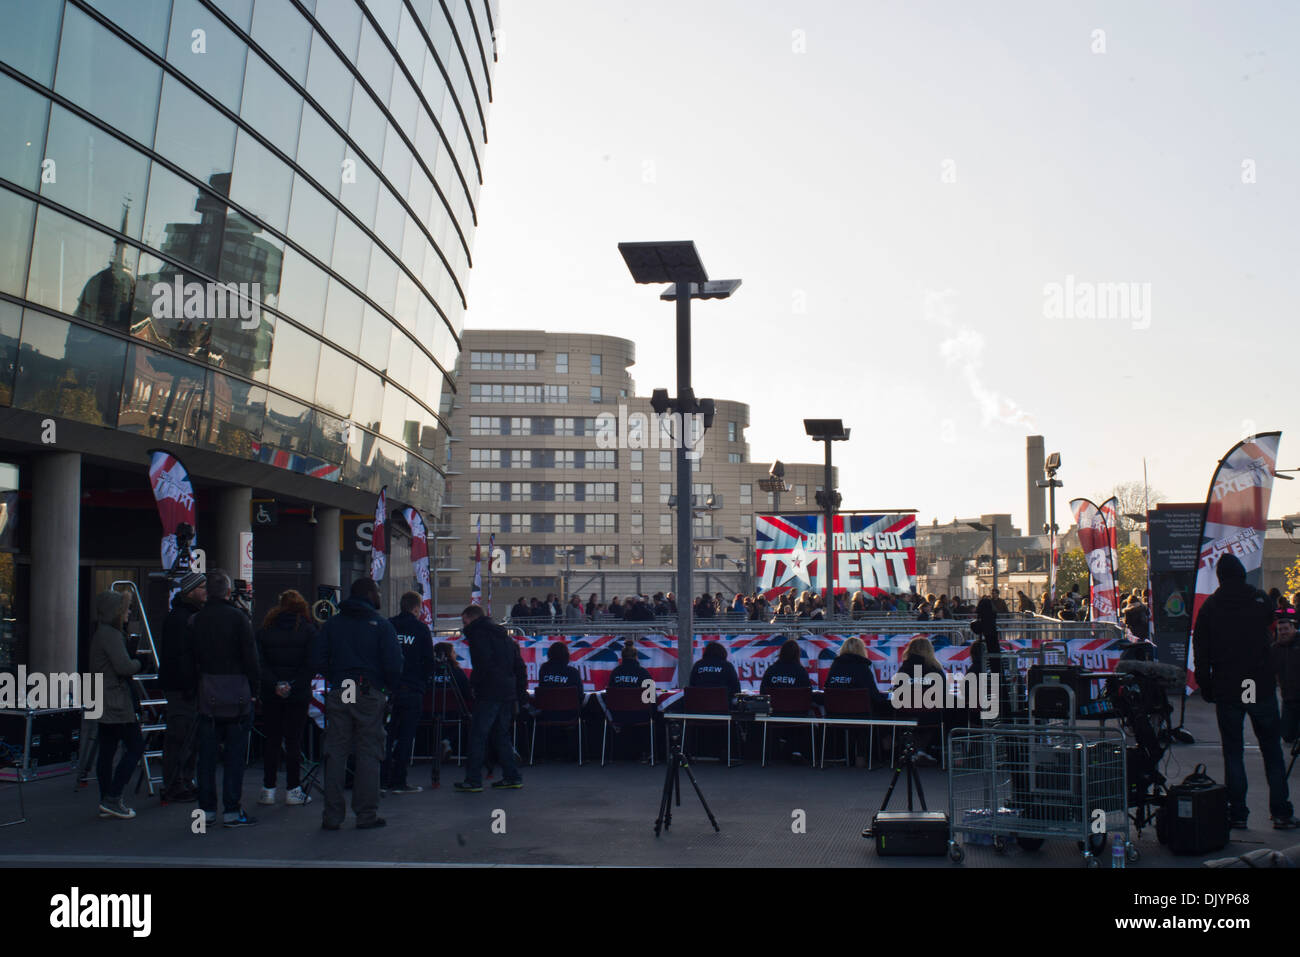 Members of the public attend the auditions for Britain's Got Talent outside the Arsenal football stadium in North London. Stock Photo